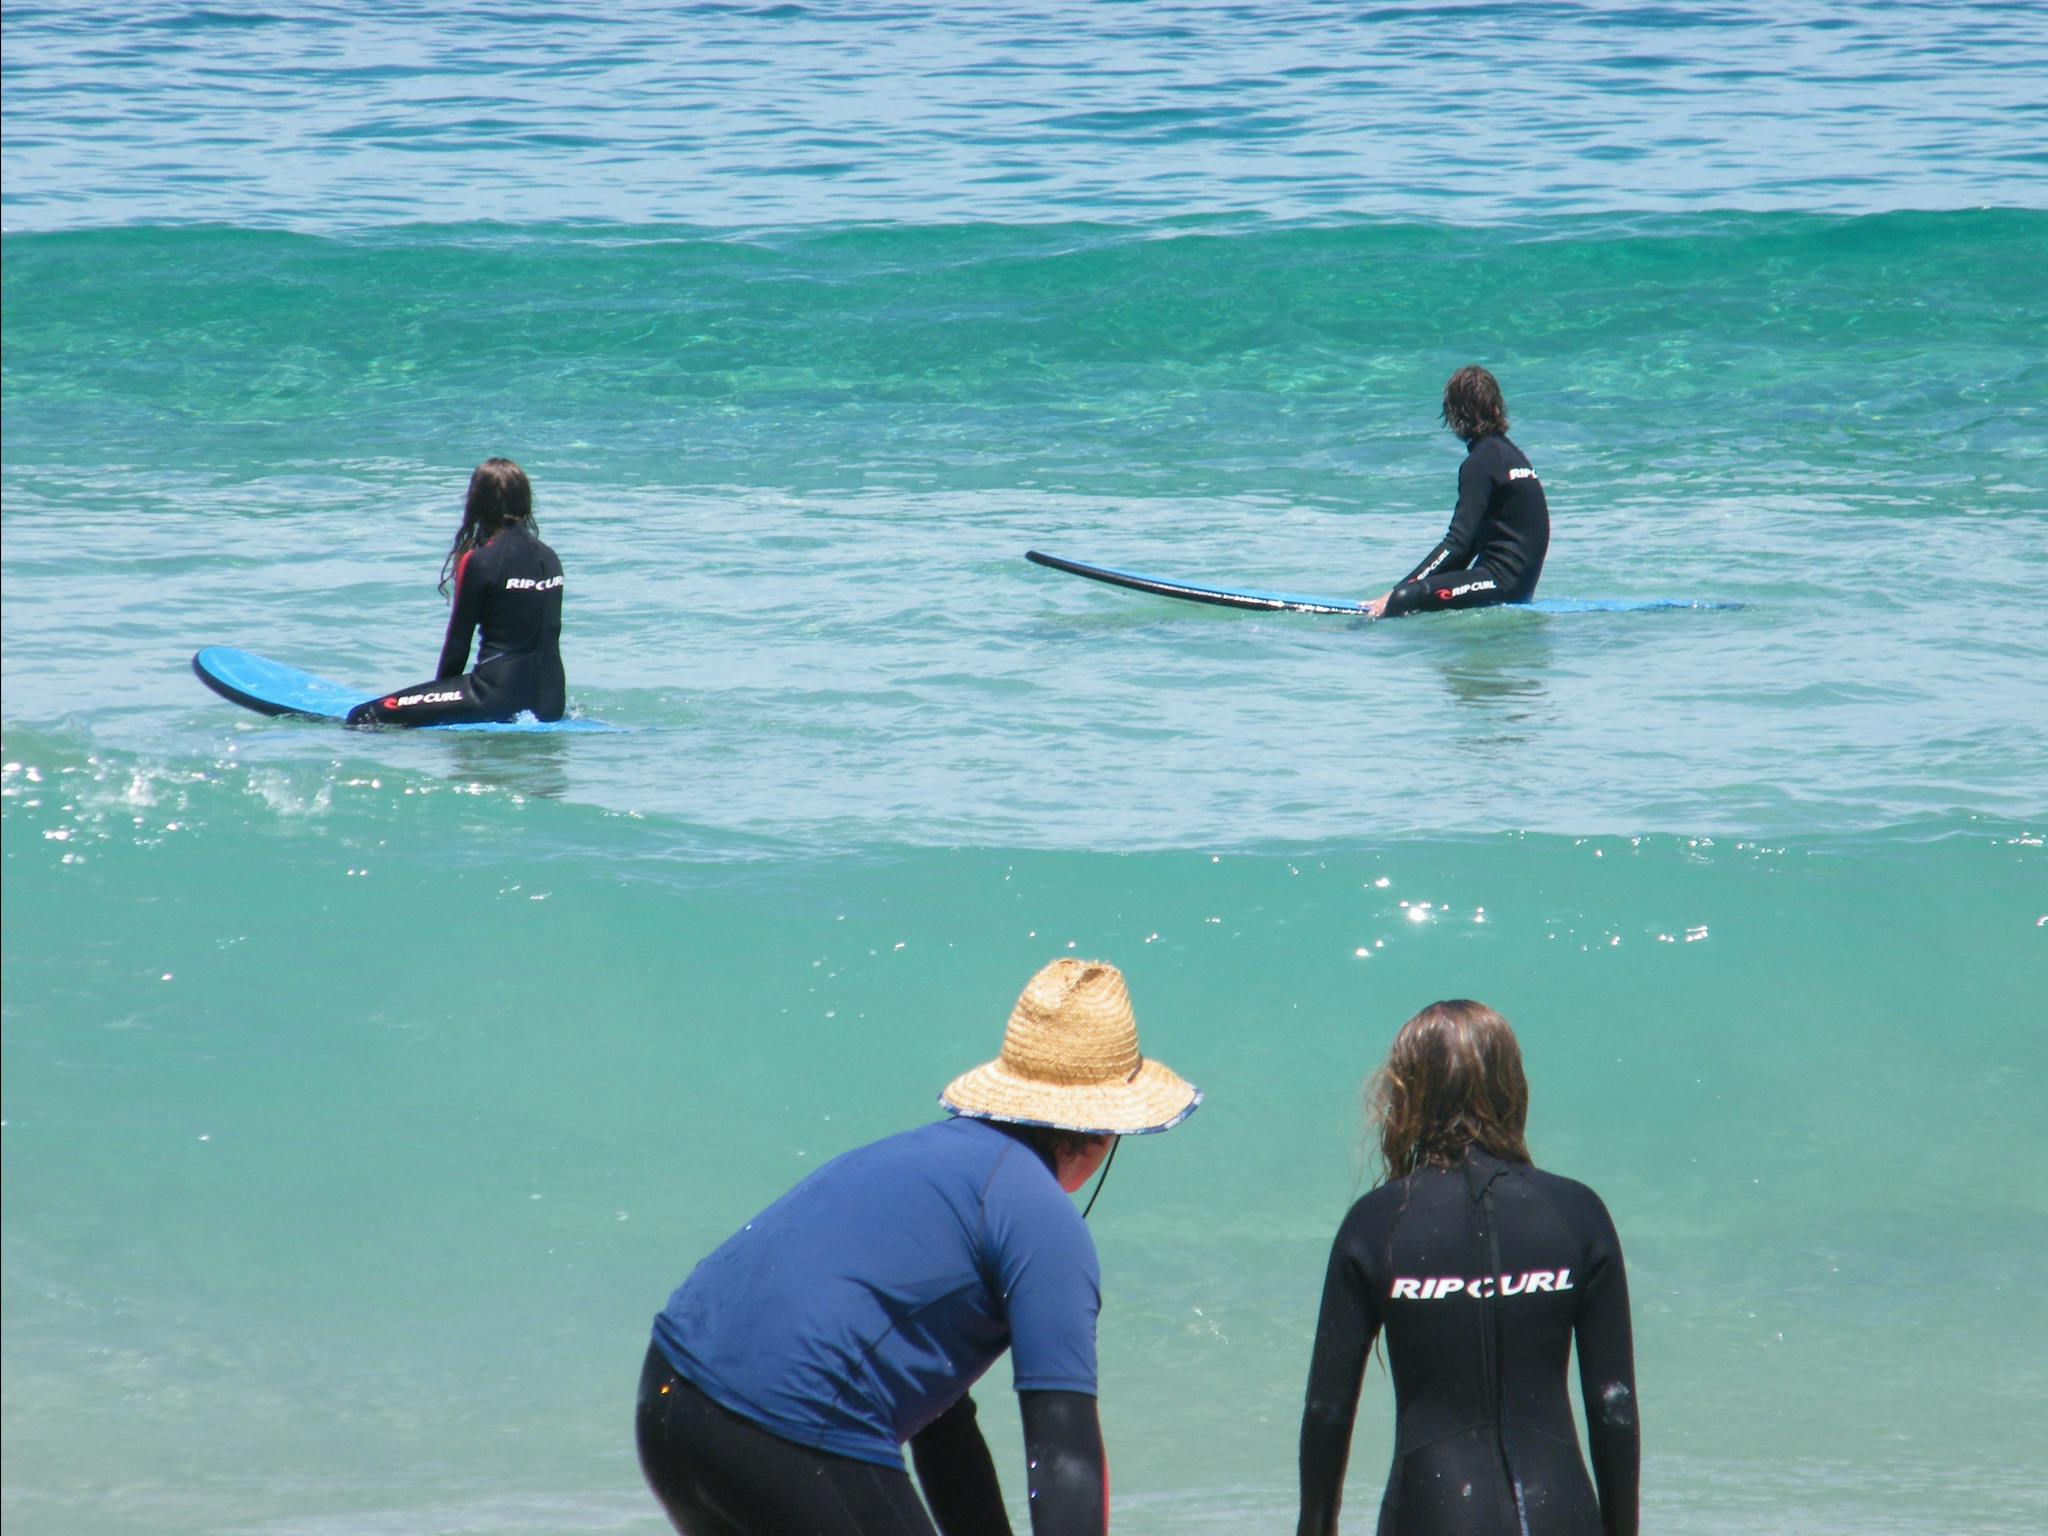 Surf camp in New South Wales is one of the most amazing wellness retreats in Australia